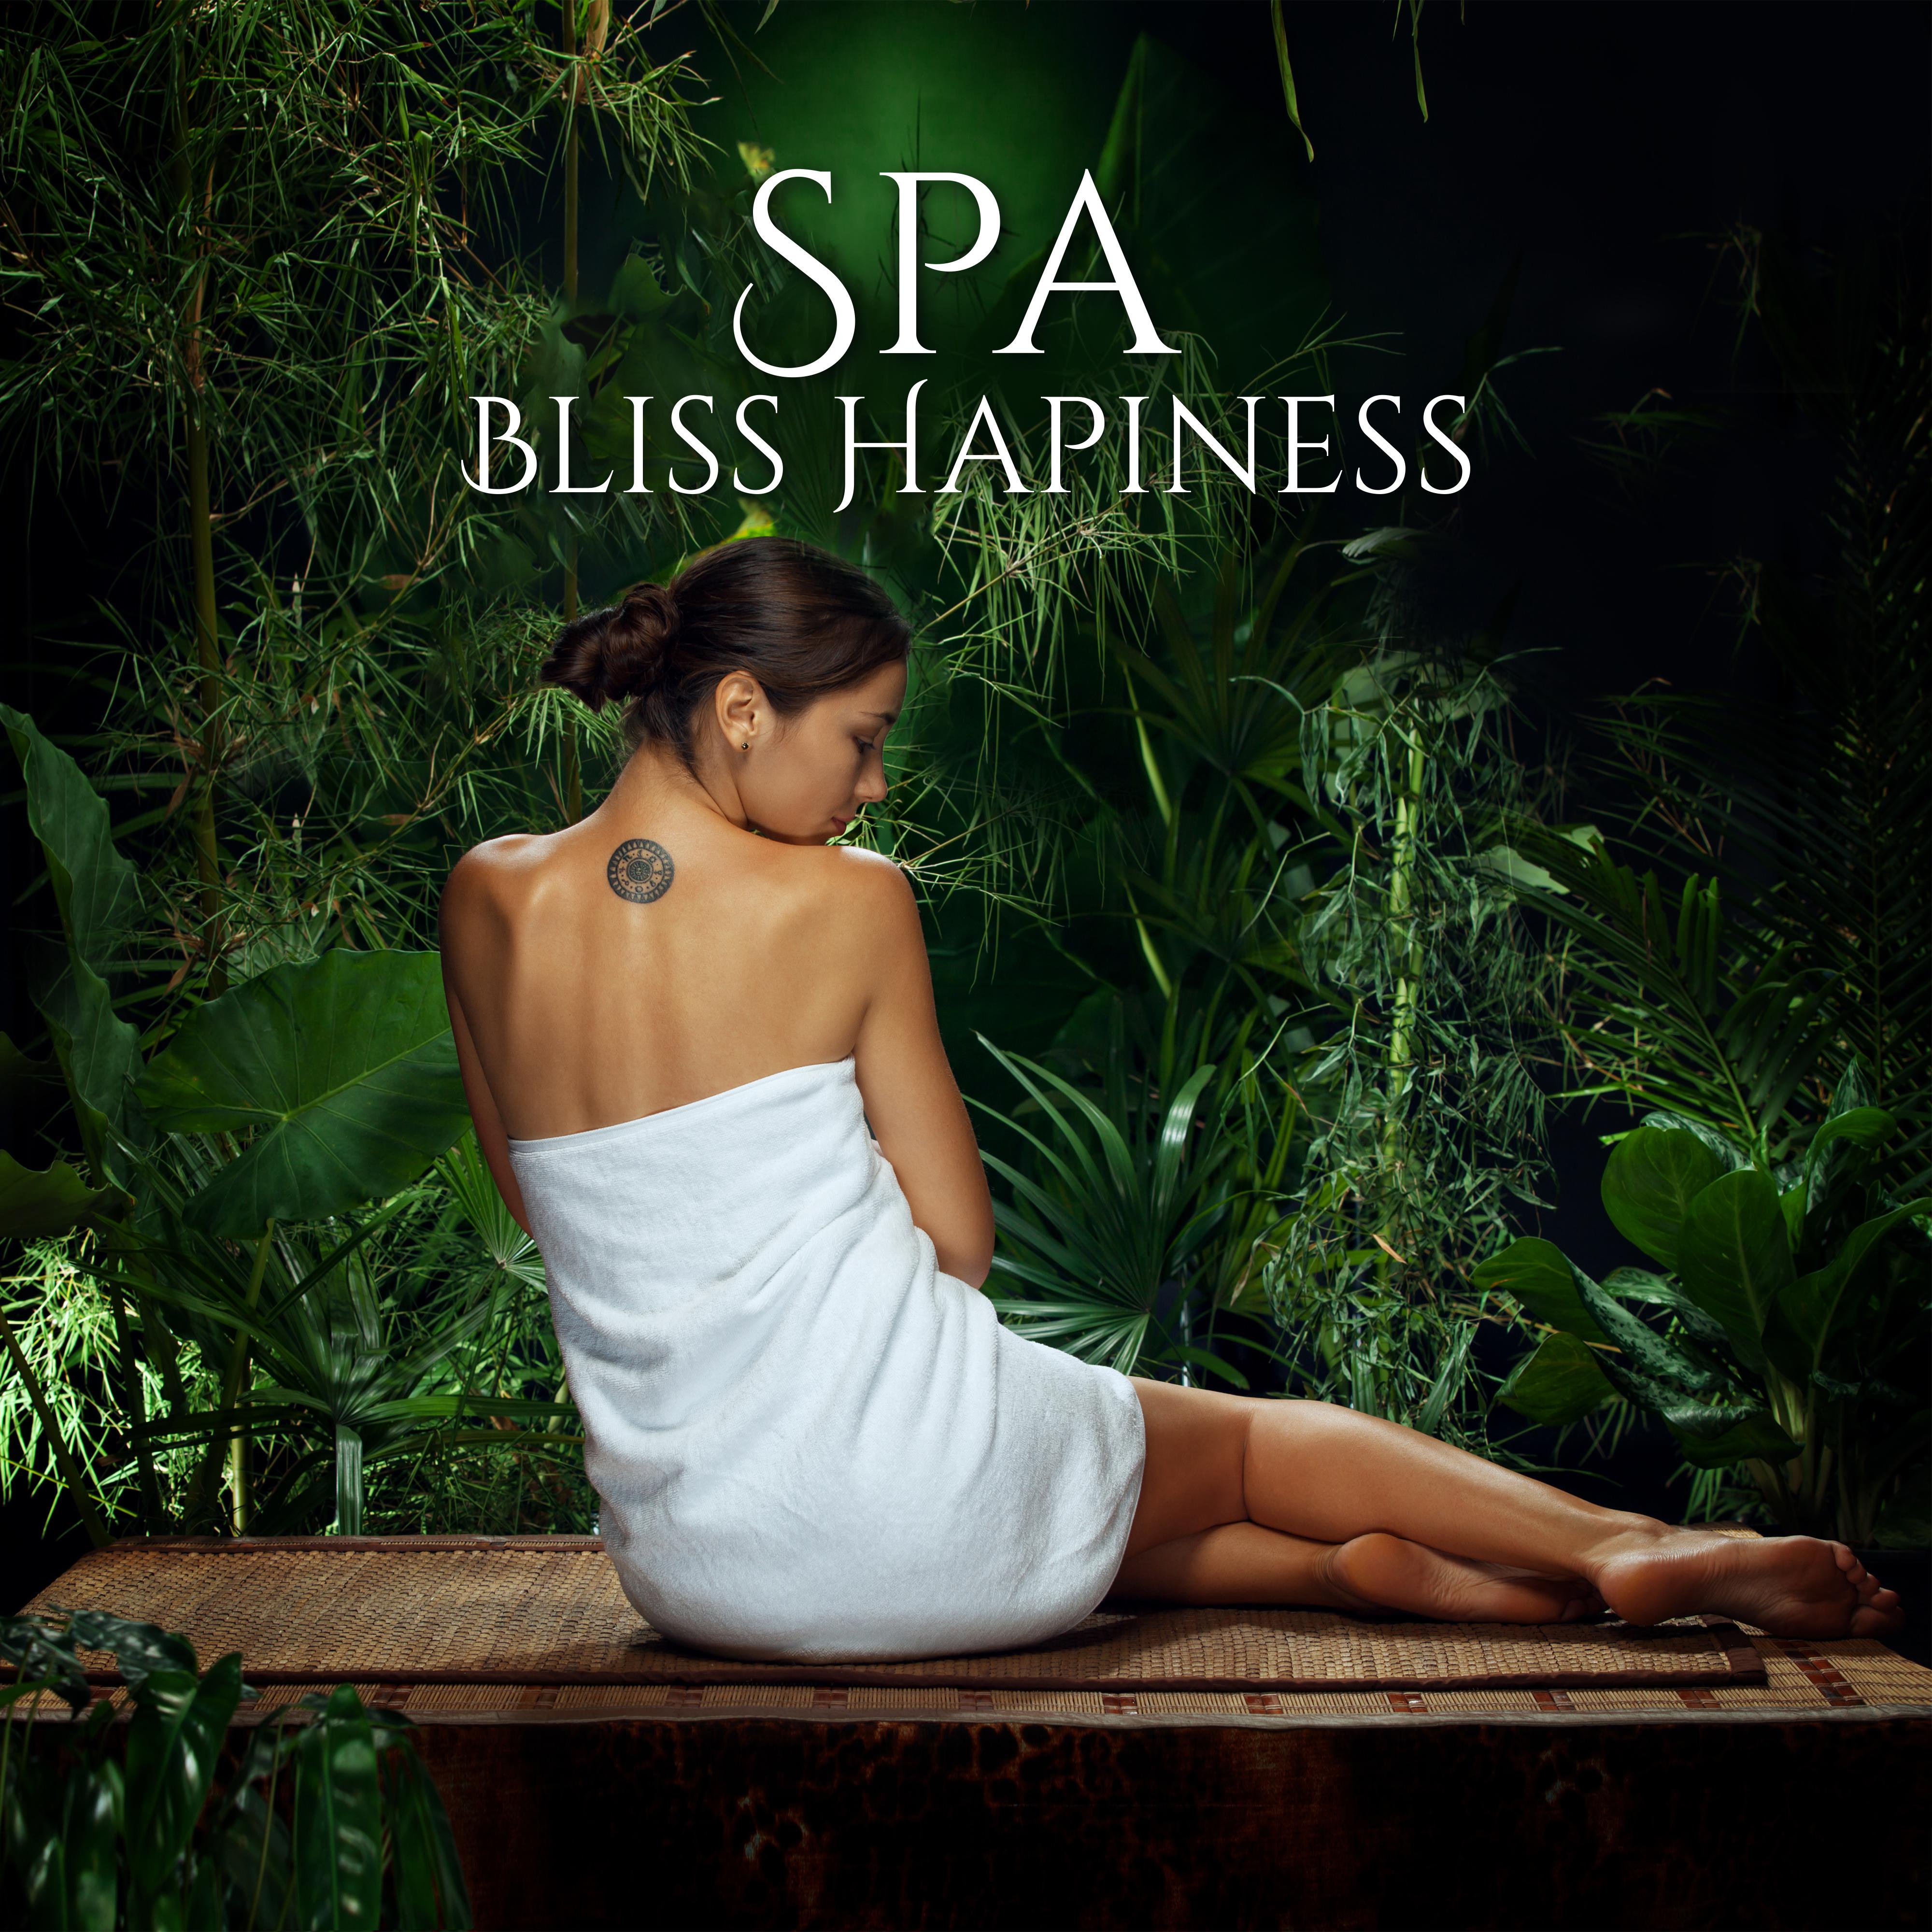 Spa Bliss Hapiness: 2019 New Age Music for Wellness, Massage Therapy & Sauna